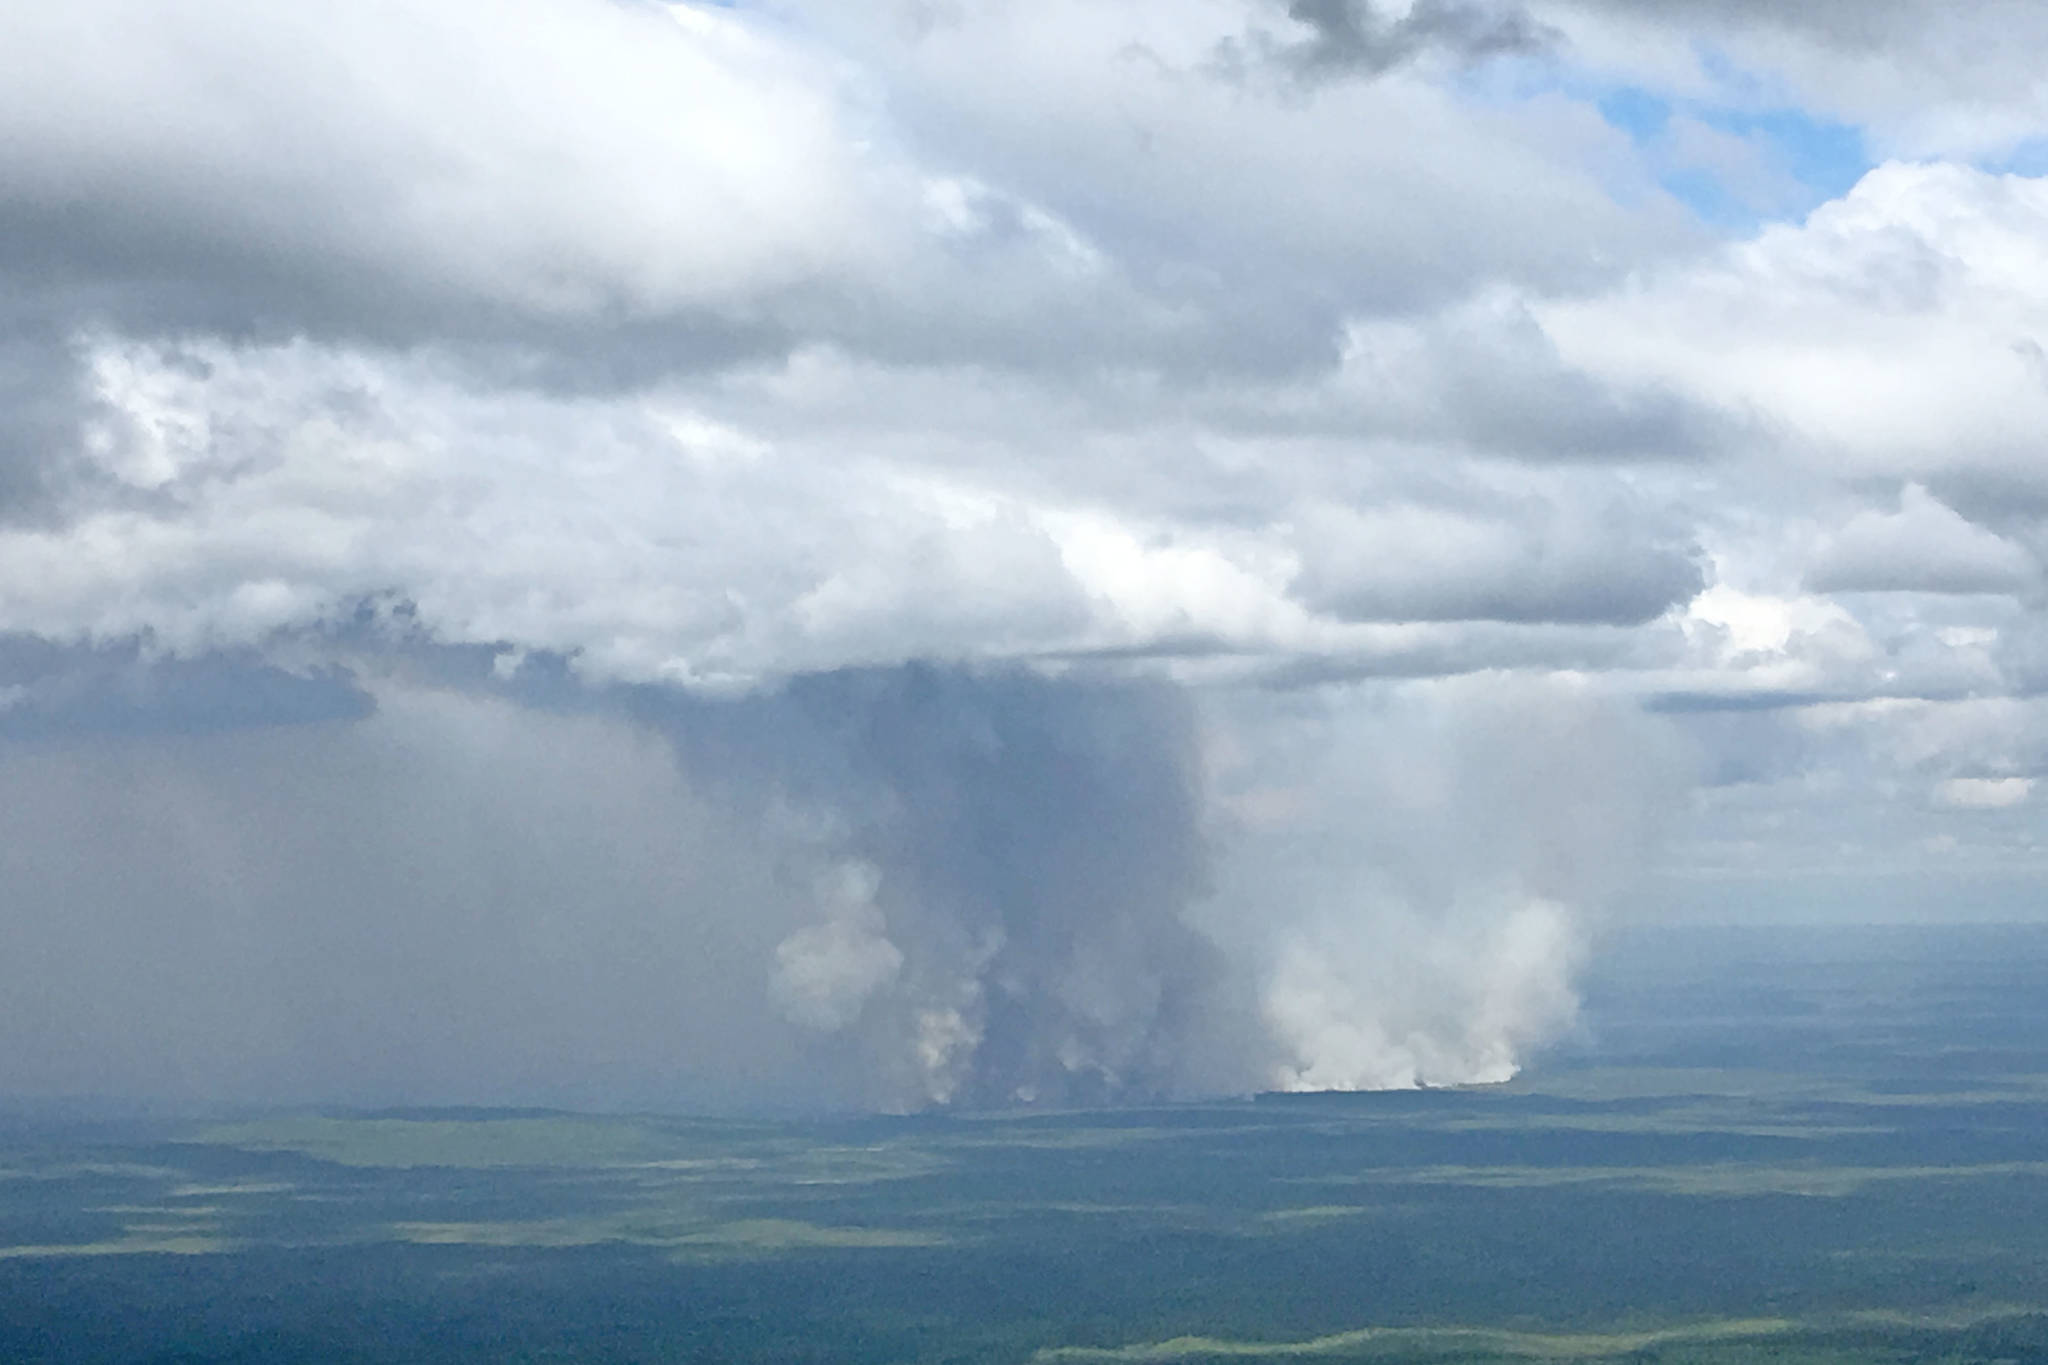 The Swan Lake Fire, as seen from the Mystery Hills, burns Wednesday, June 12, 2019, on the Kenai Peninsula in Alaska. (Photo by Jeff Helminiak/Peninsula Clarion)